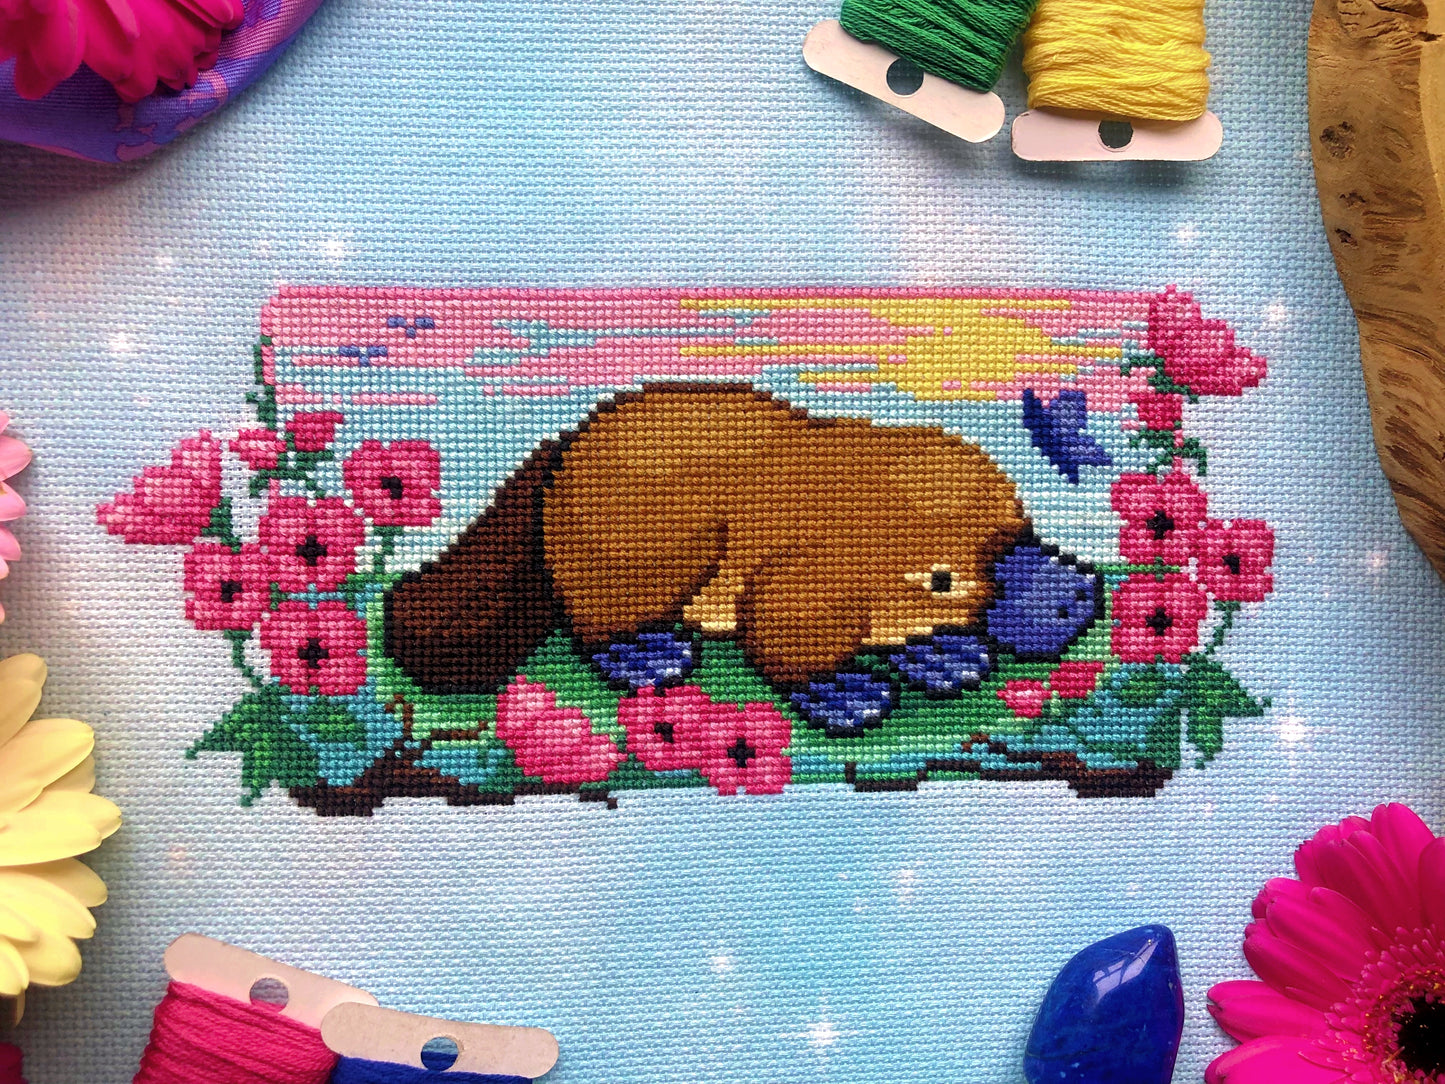 Closeup of Platypus cross stitch pattern, scene surrounded by flowers and bobbins. Colors are bright. Mainly pink, blue, yellow, green, and brown are present. Platypus is facing right, and is surrounded by pink flowers. There is a blue butterfly.